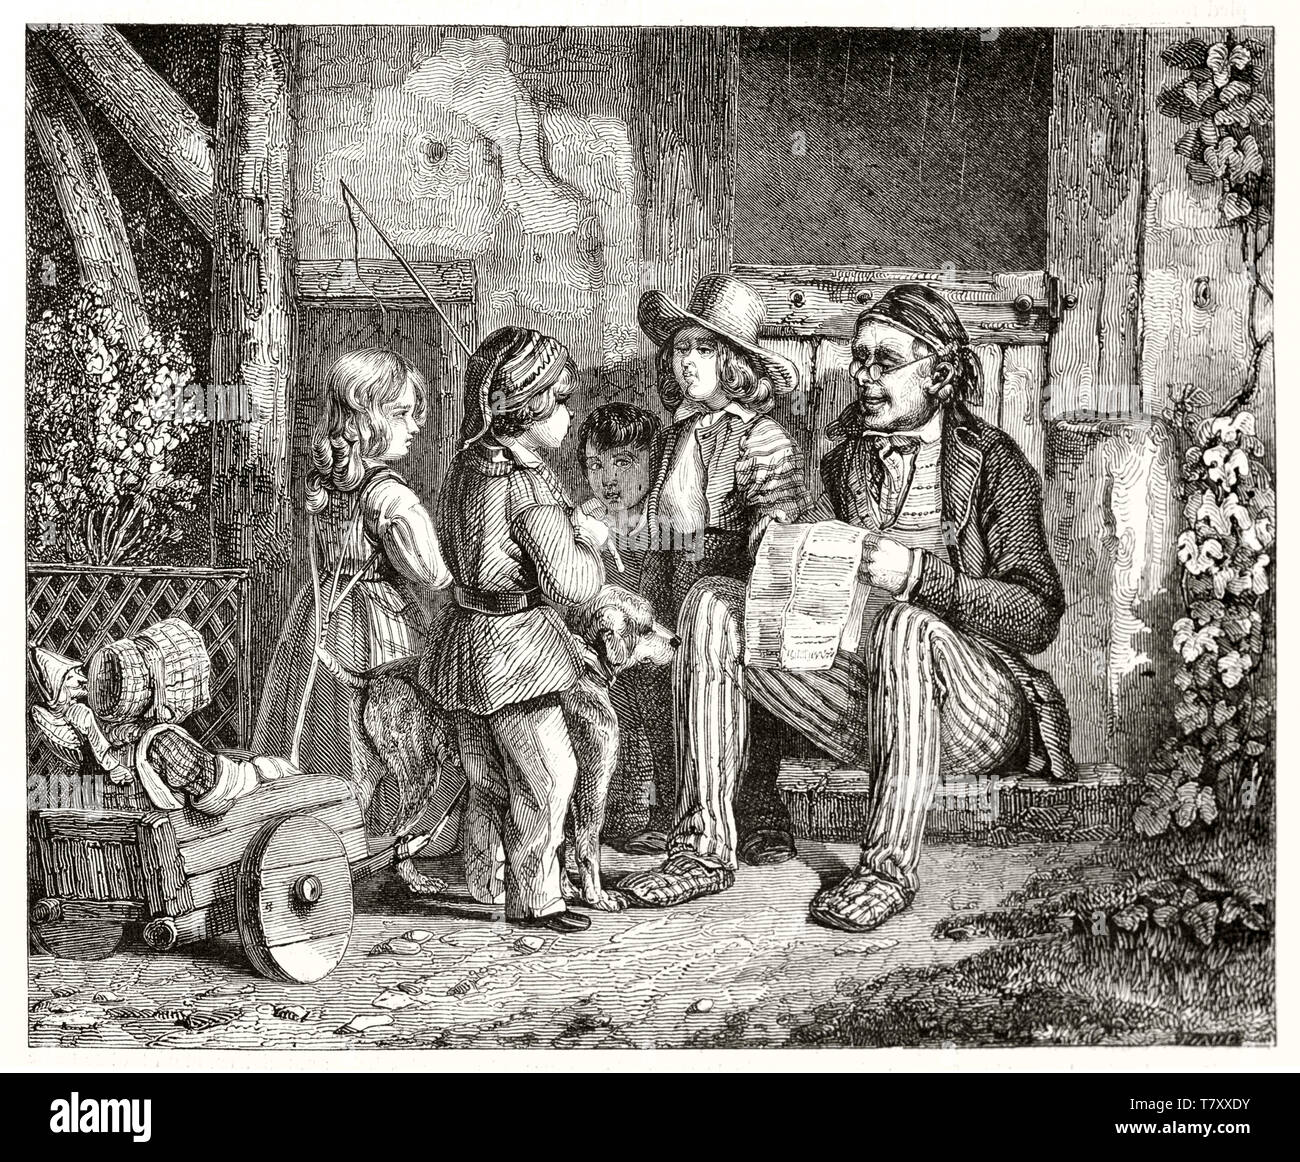 Old man reading news to children seated outdoor. Very detailed etching style illustration with a mirable hatching. By Charlet publ. on Magasin Pittoresque Paris 1848 Stock Photo